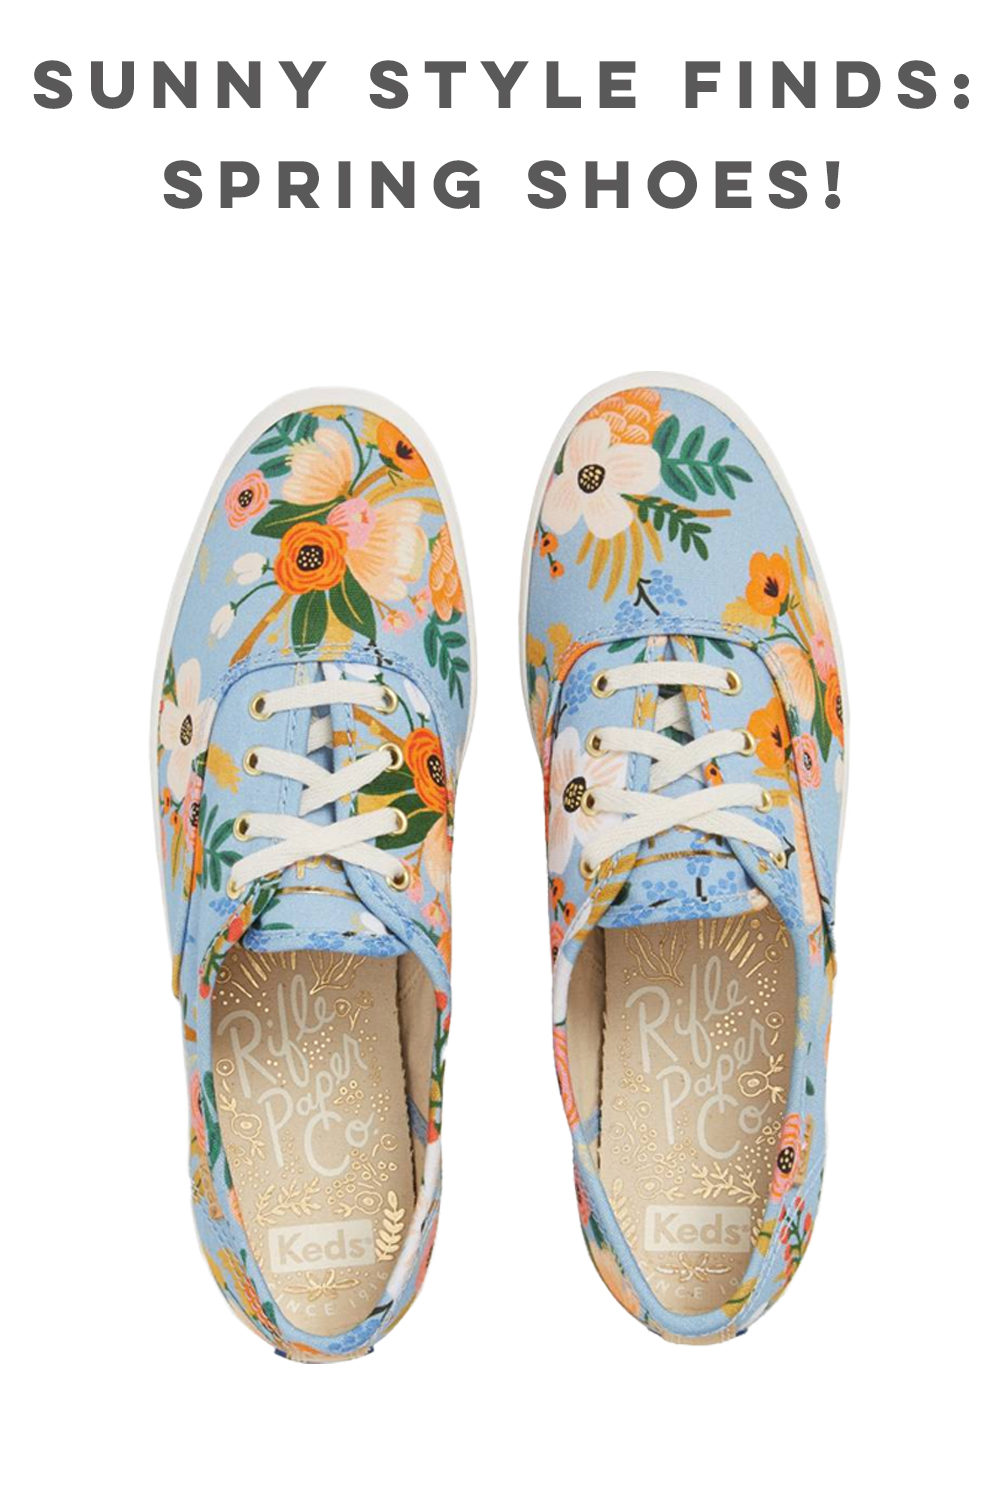 Shoes for Spring and Summer: Rifle Paper Co. X Keds